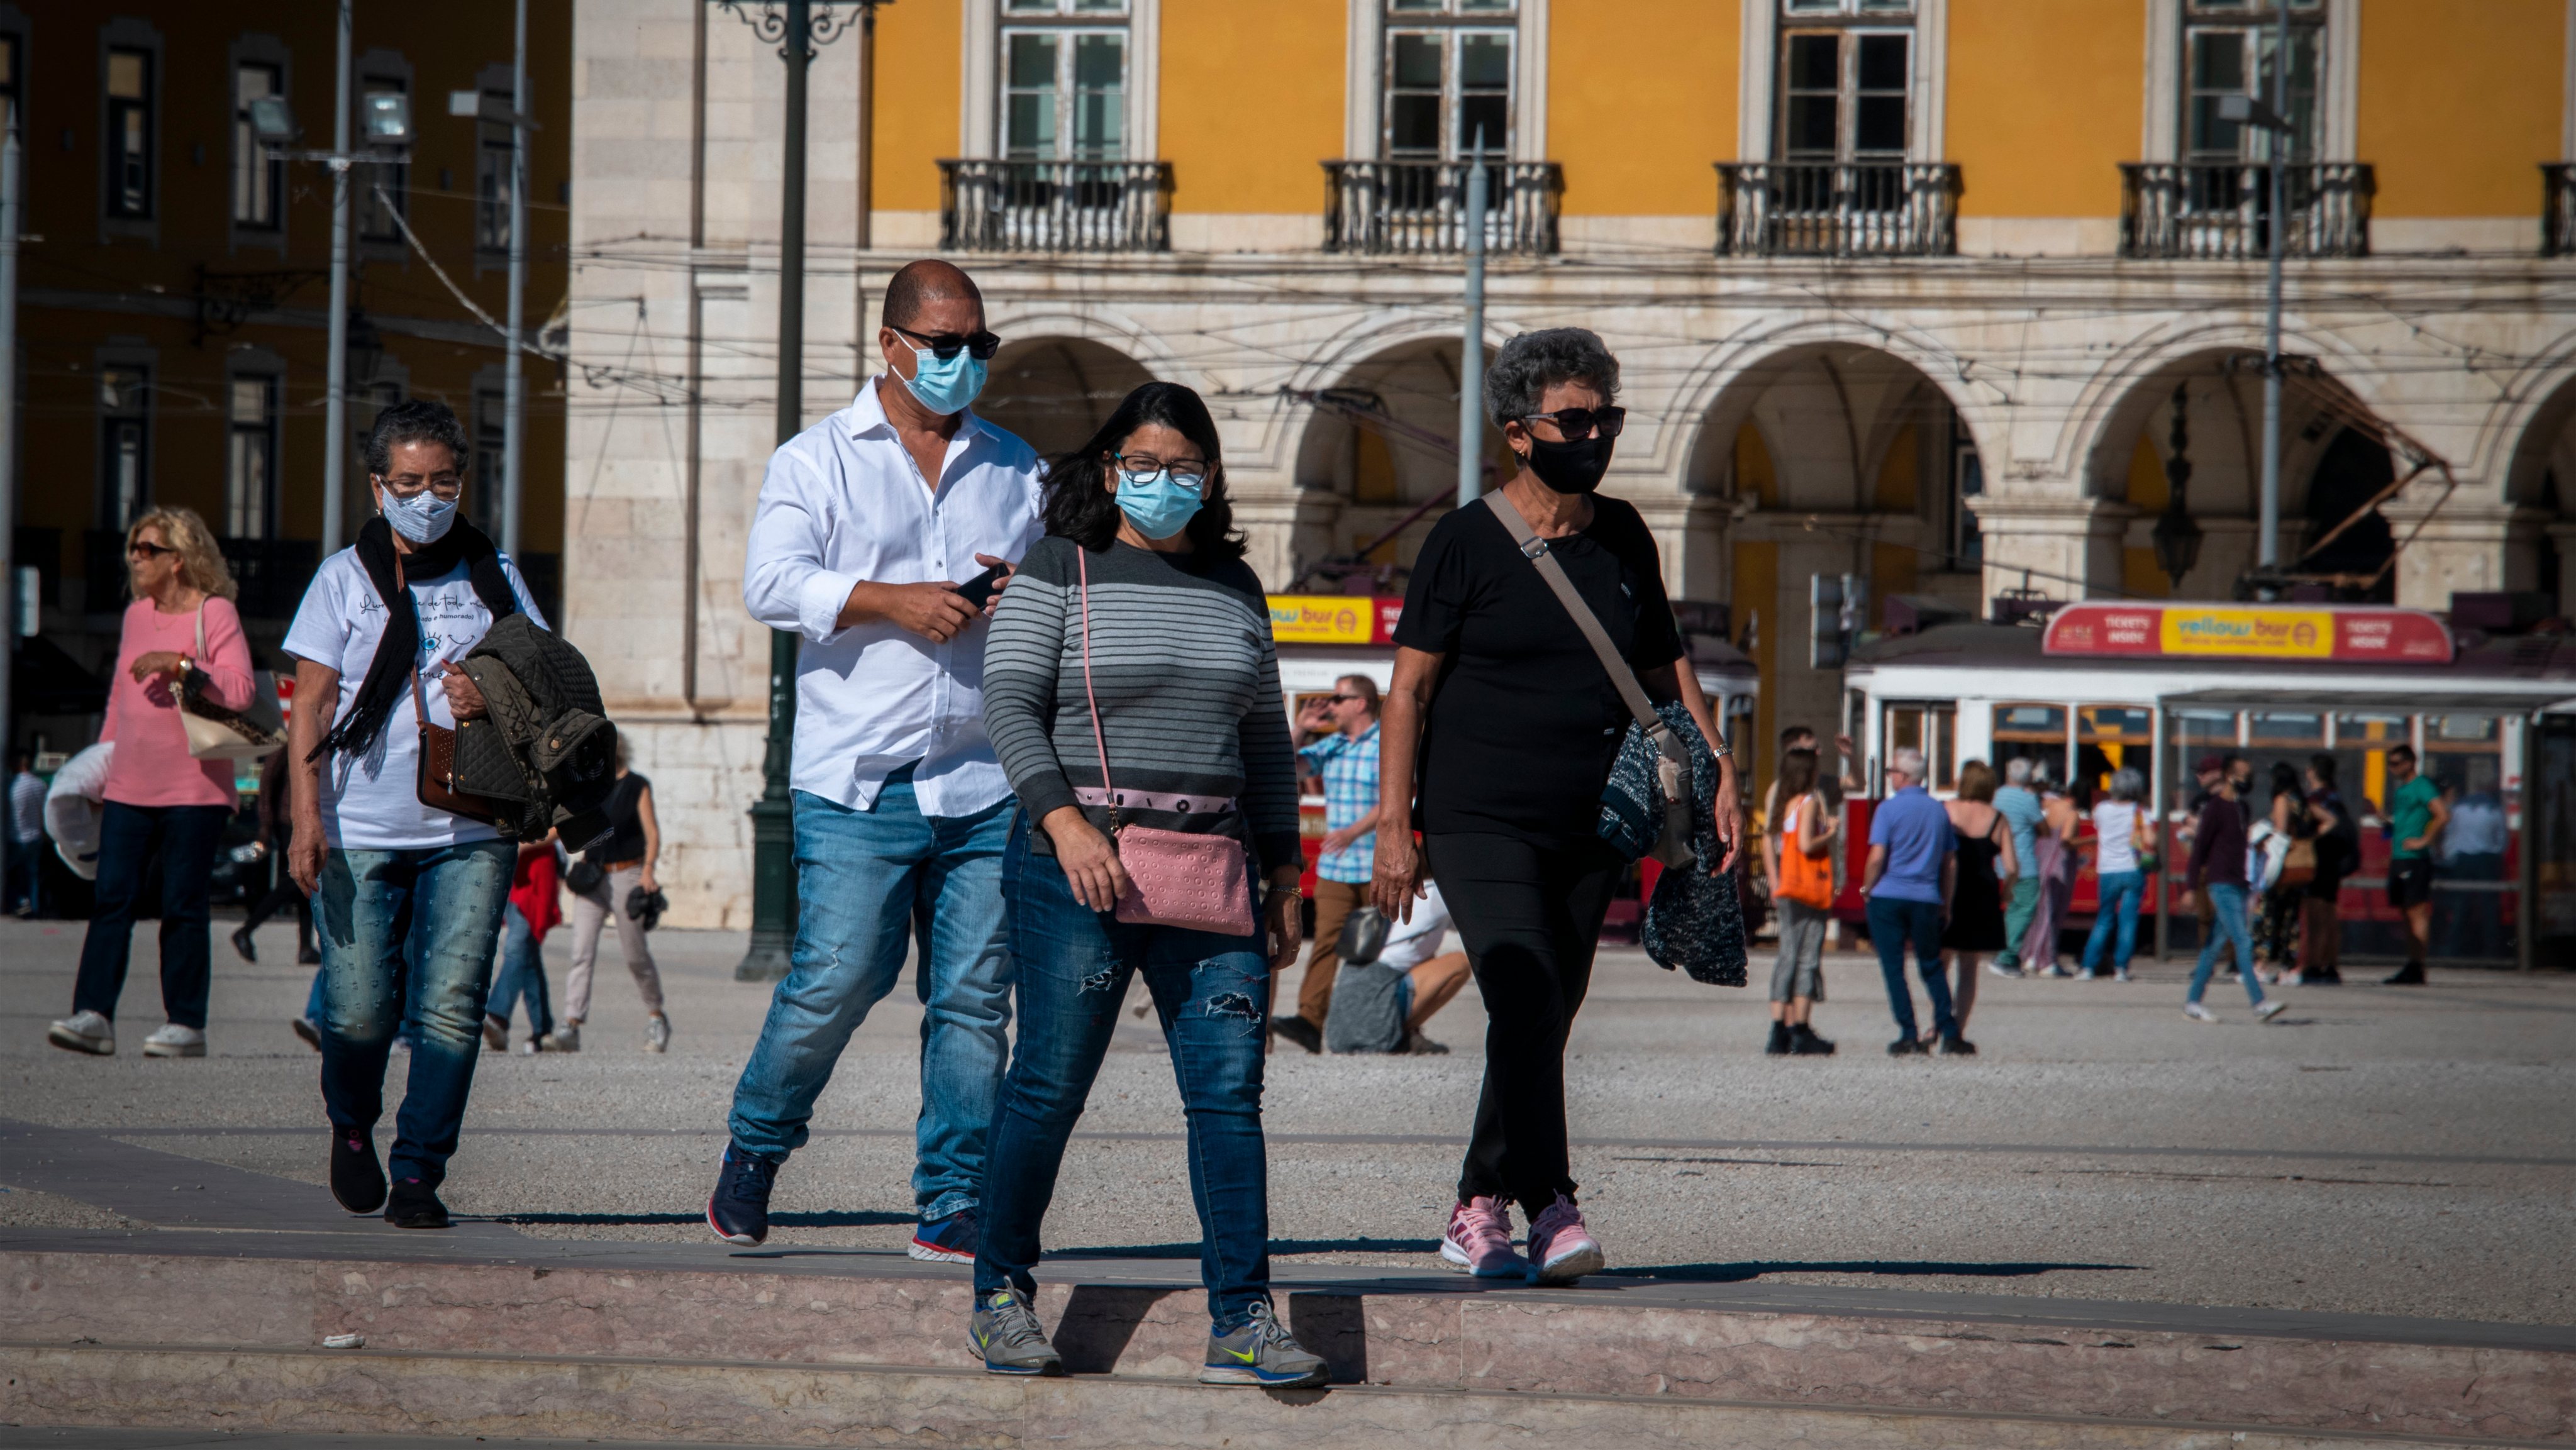 Daily Life In Lisbon Amid COVID-19 Pandemic